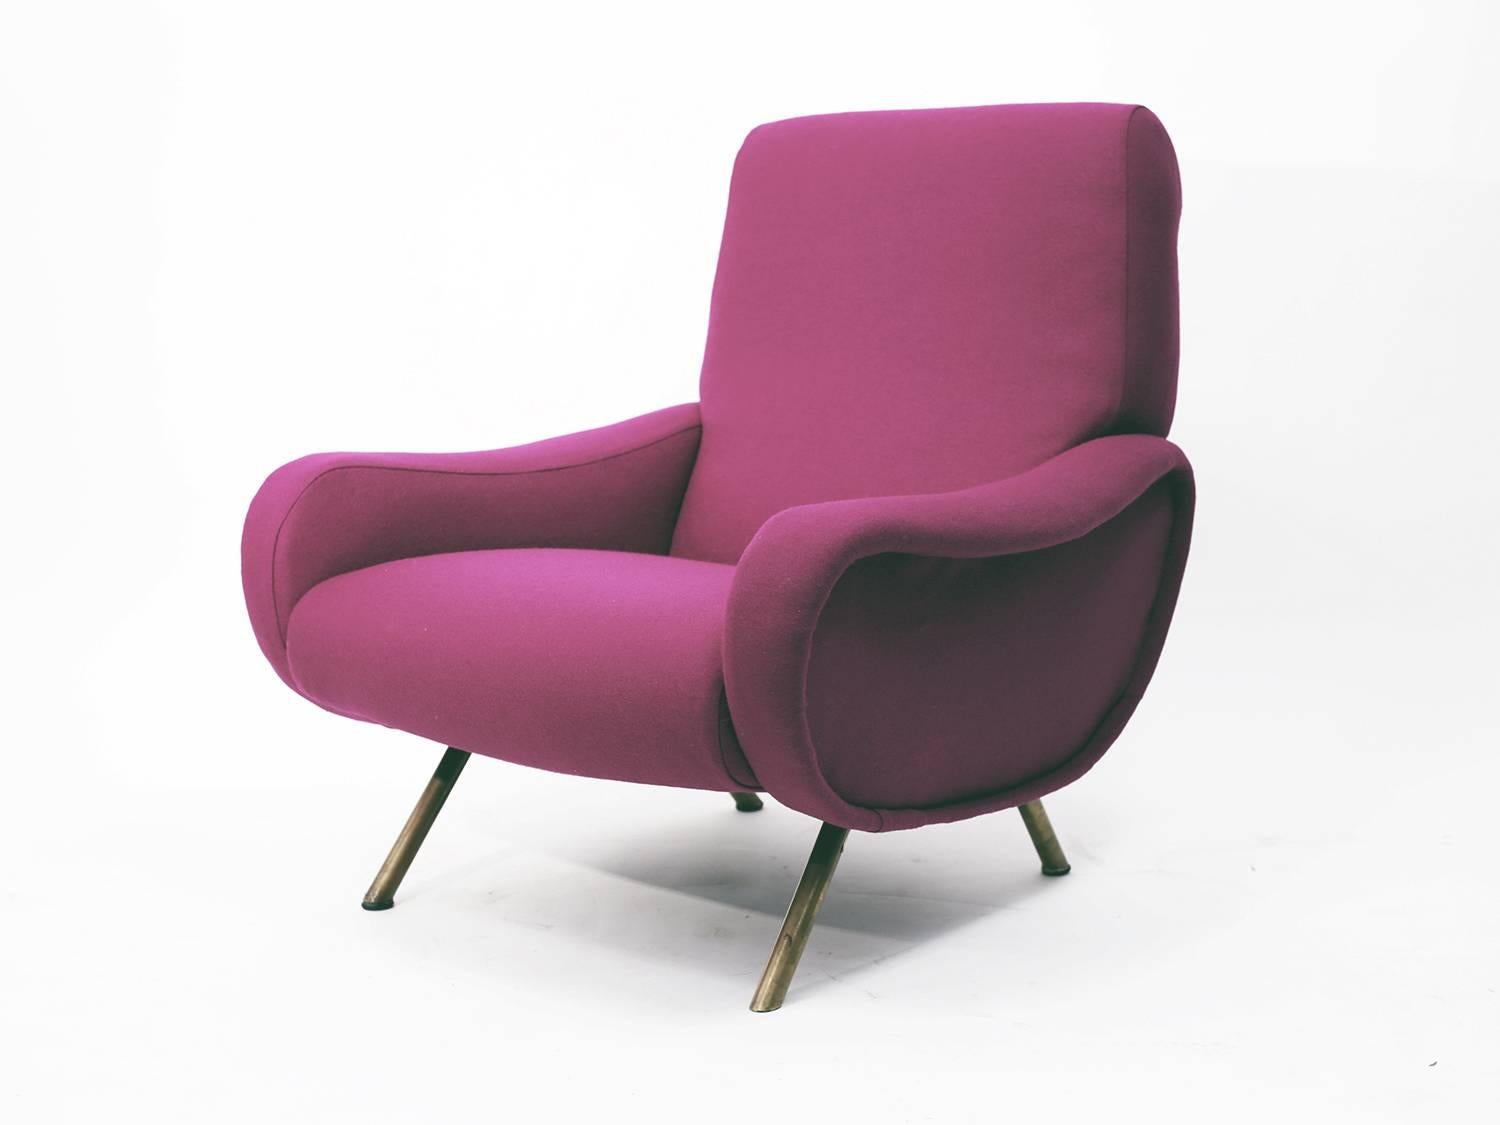 Original Lady armchair designed by Marco Zanuso.
Manufactured by Artiflex, newly re-upholstered in Knoll fabric.